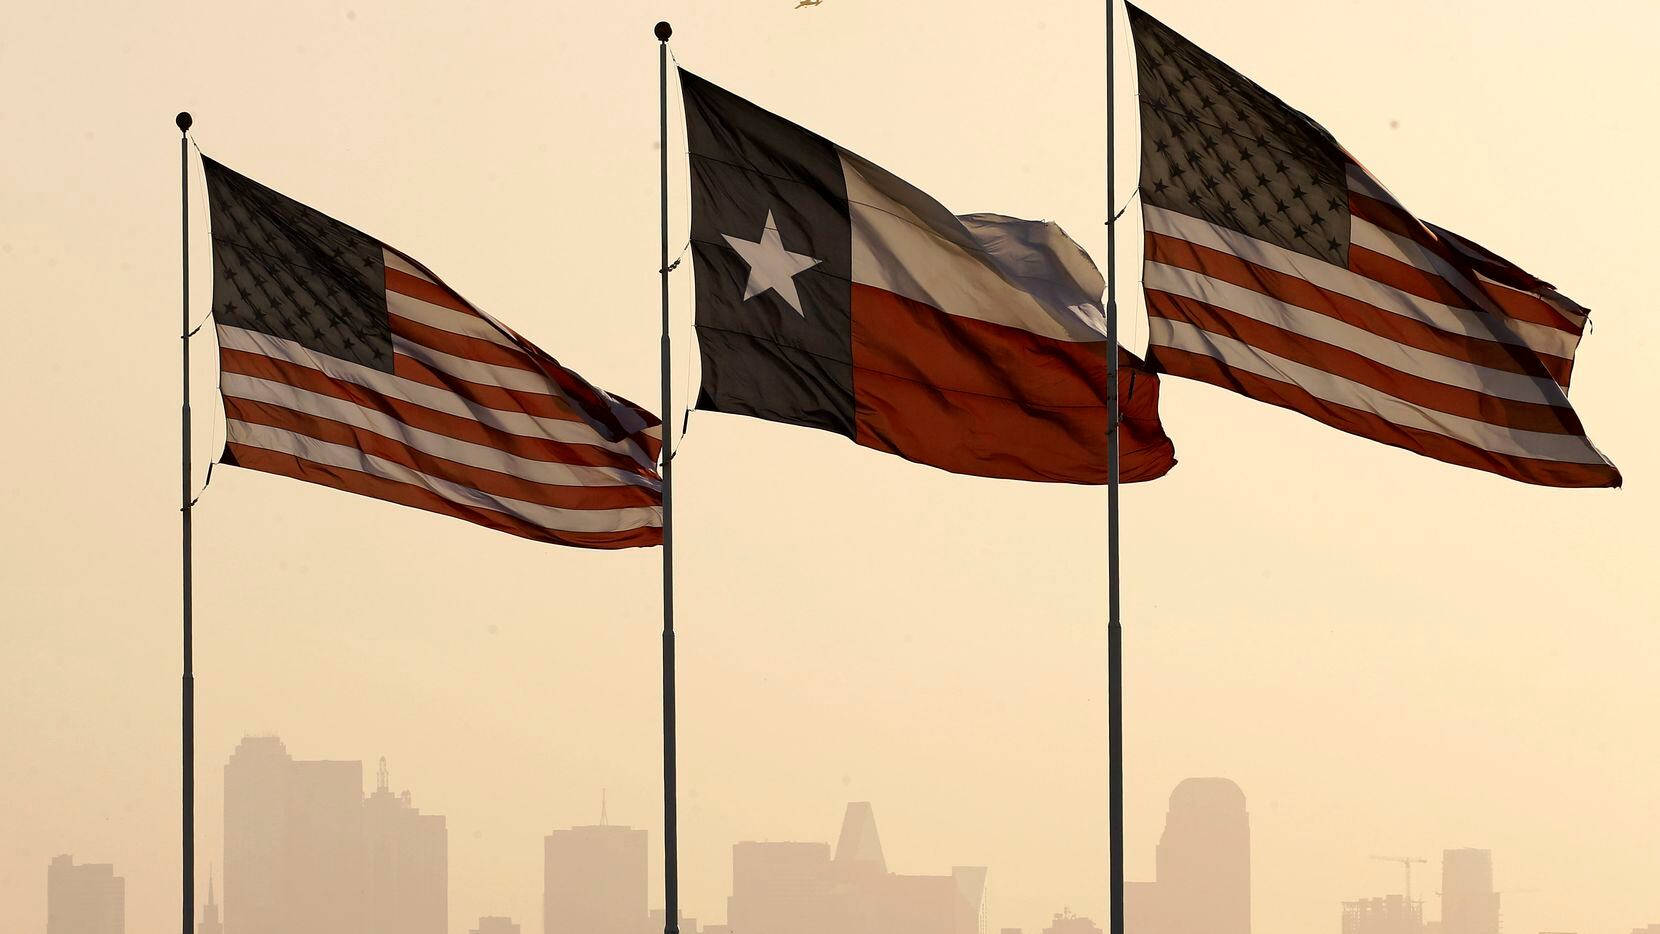 Stiff south winds blow into North Texas and downtown Dallas as Texas and U.S. flags fly...